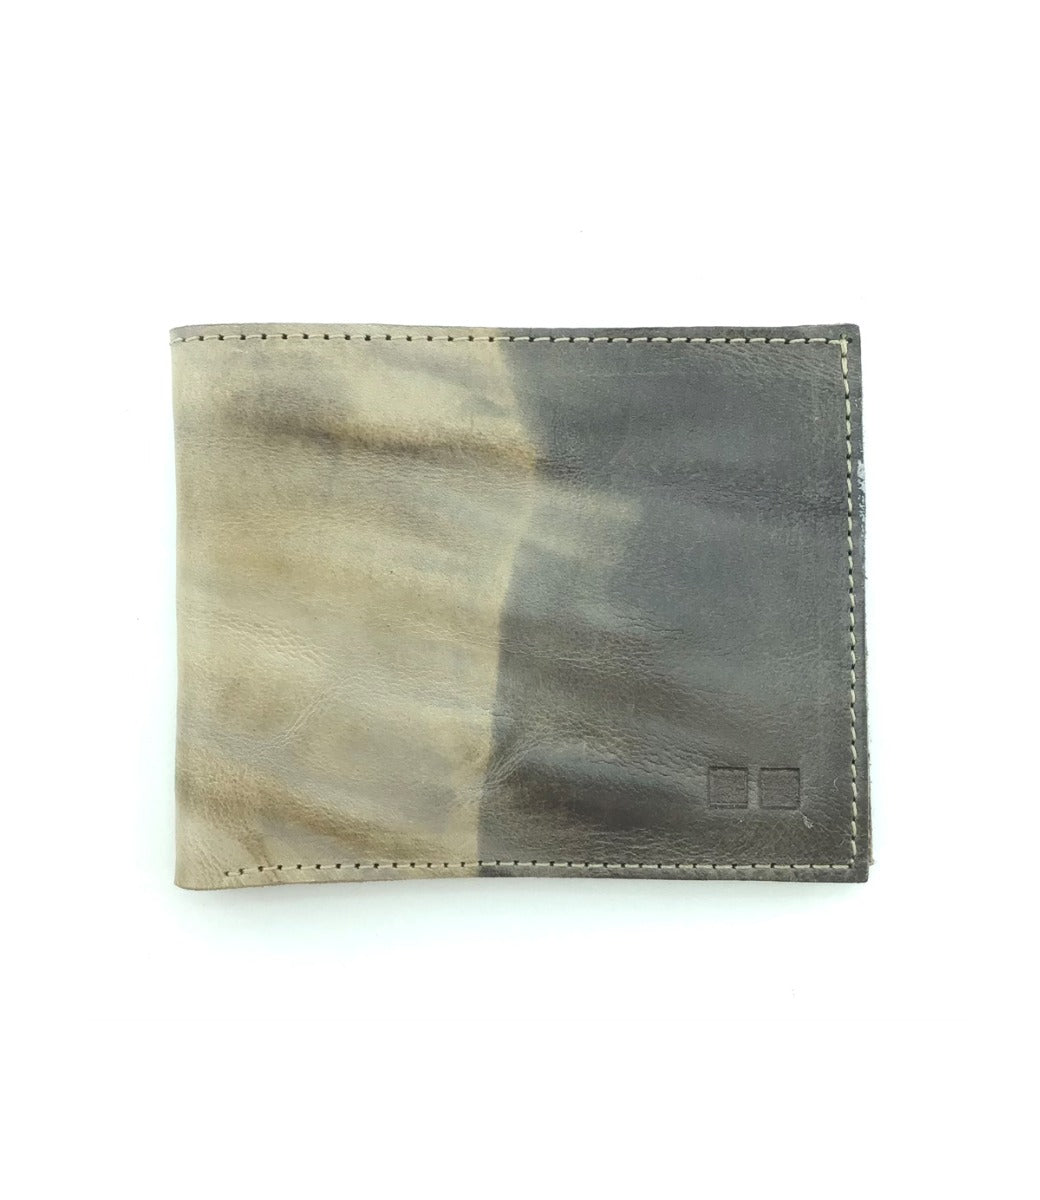 An image of a Amidala wallet with a brown and tan color from Bed Stu.